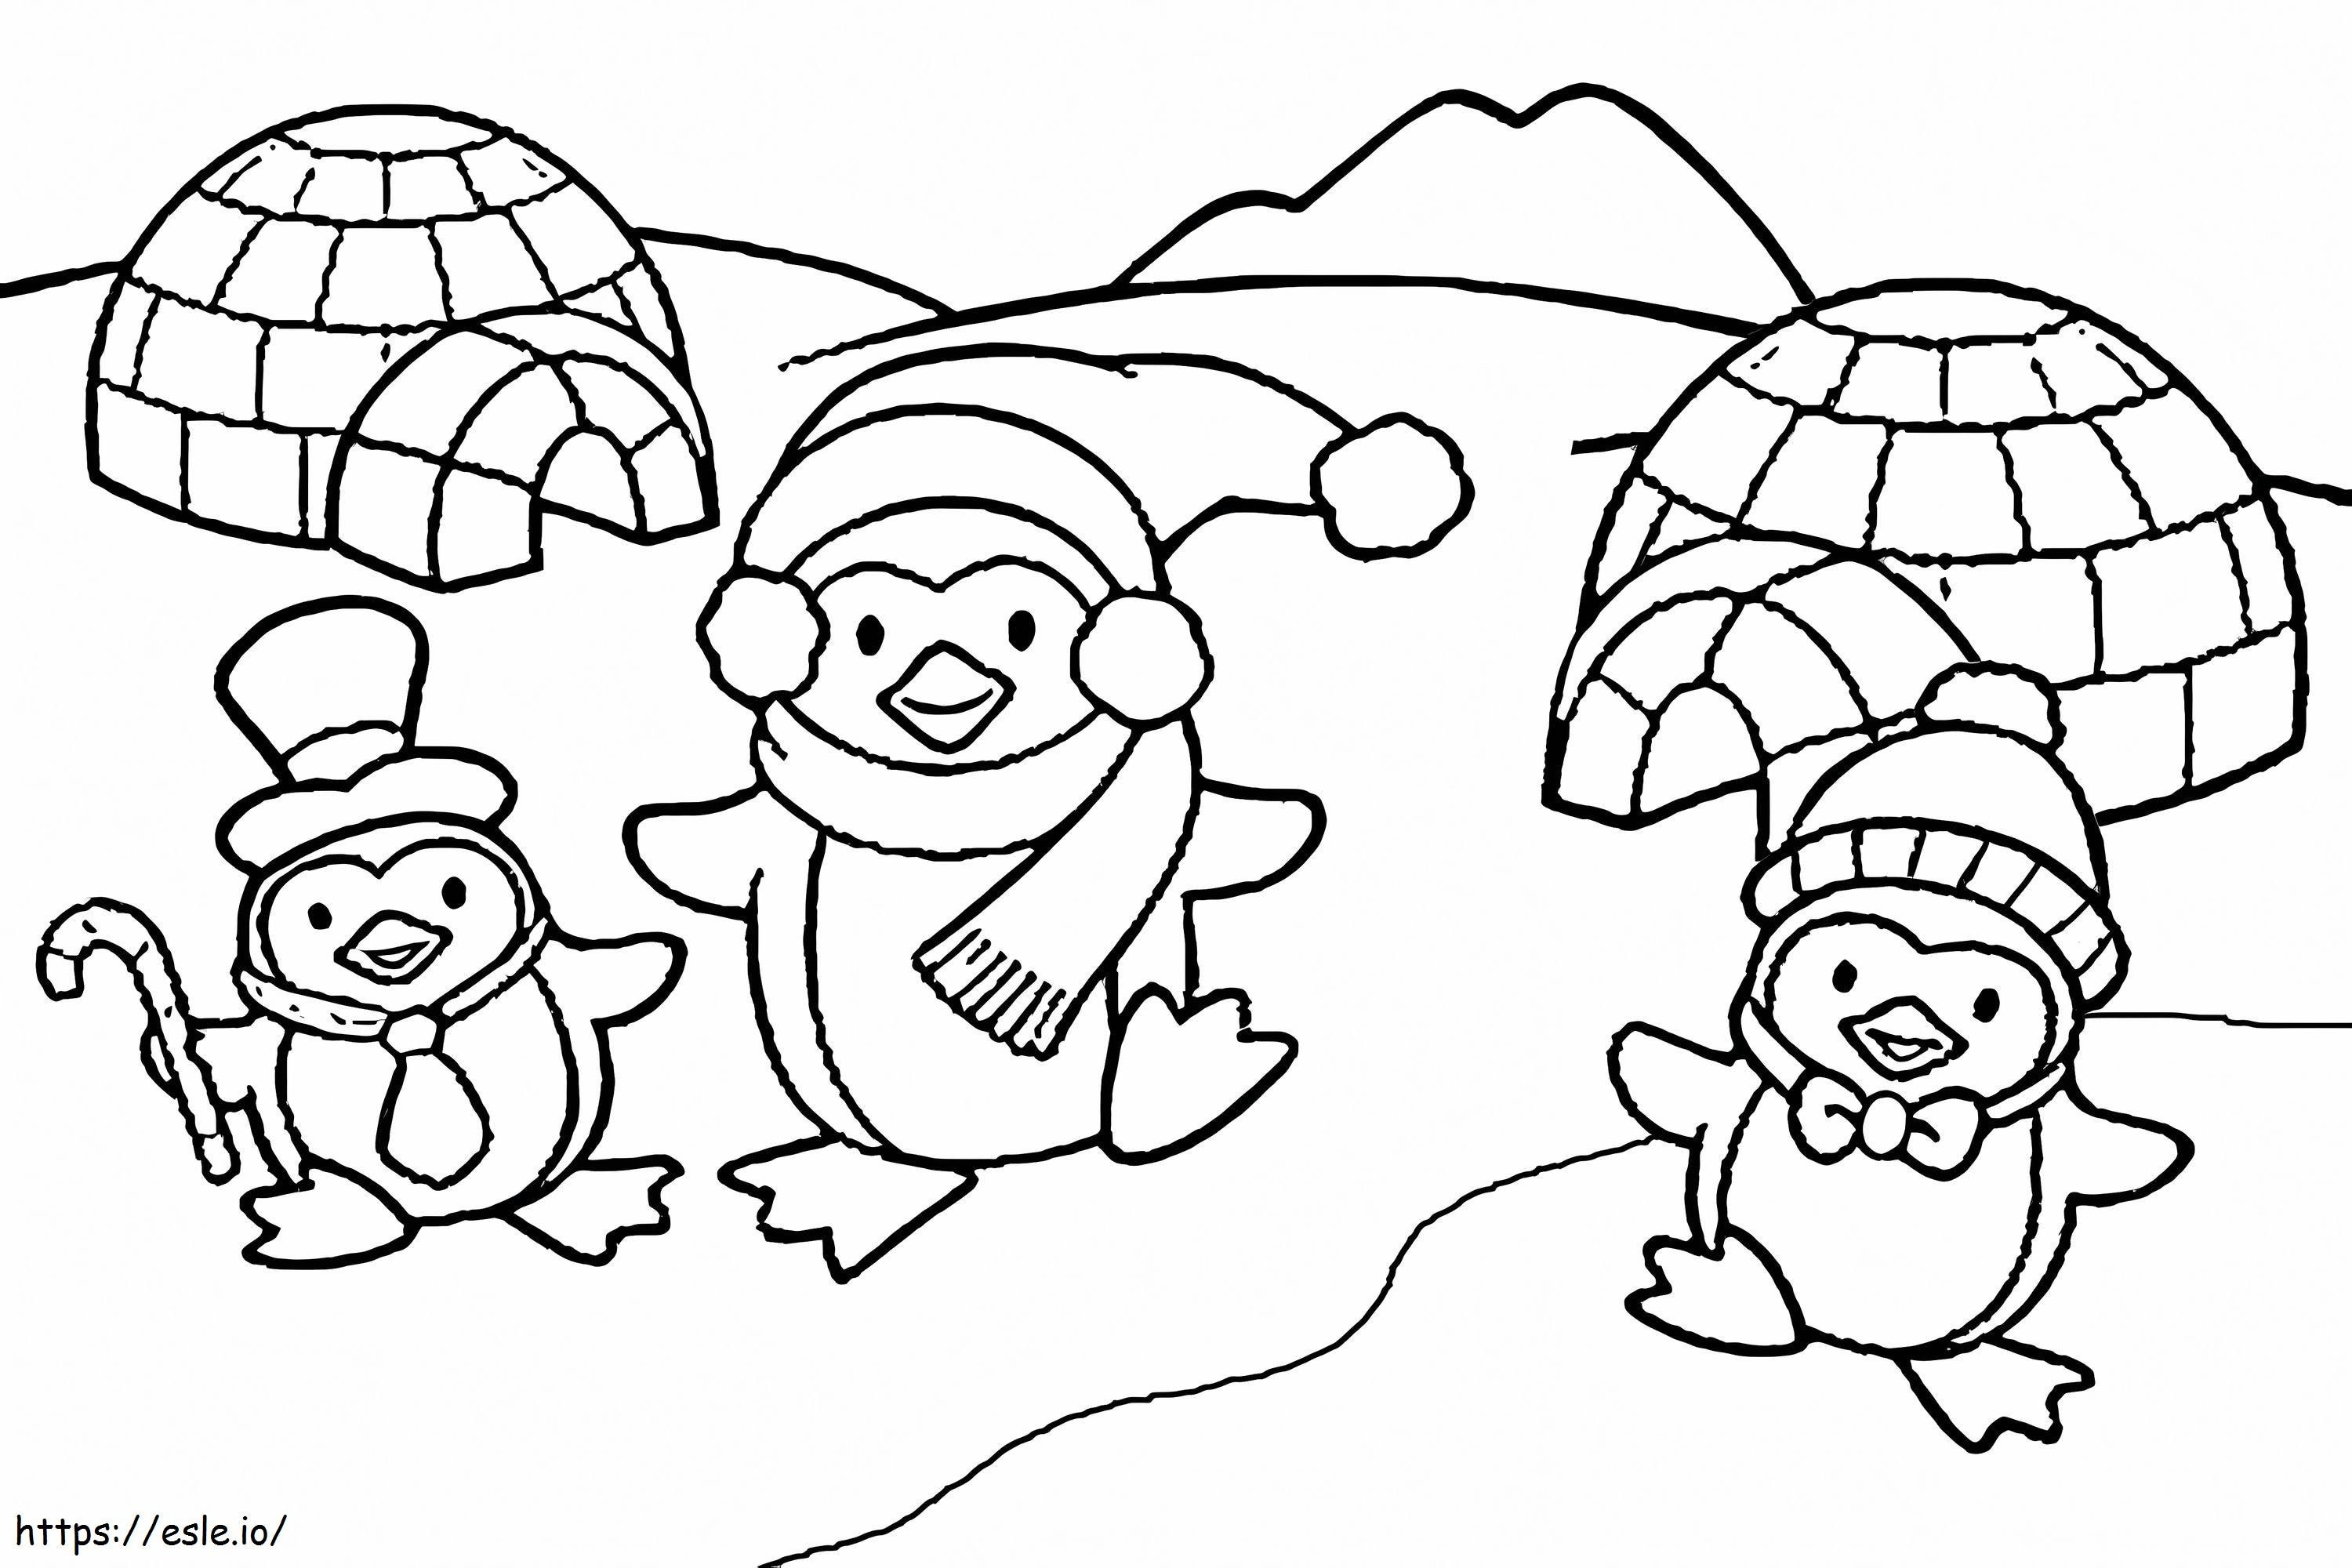 Three Penguins And Two Igloos coloring page